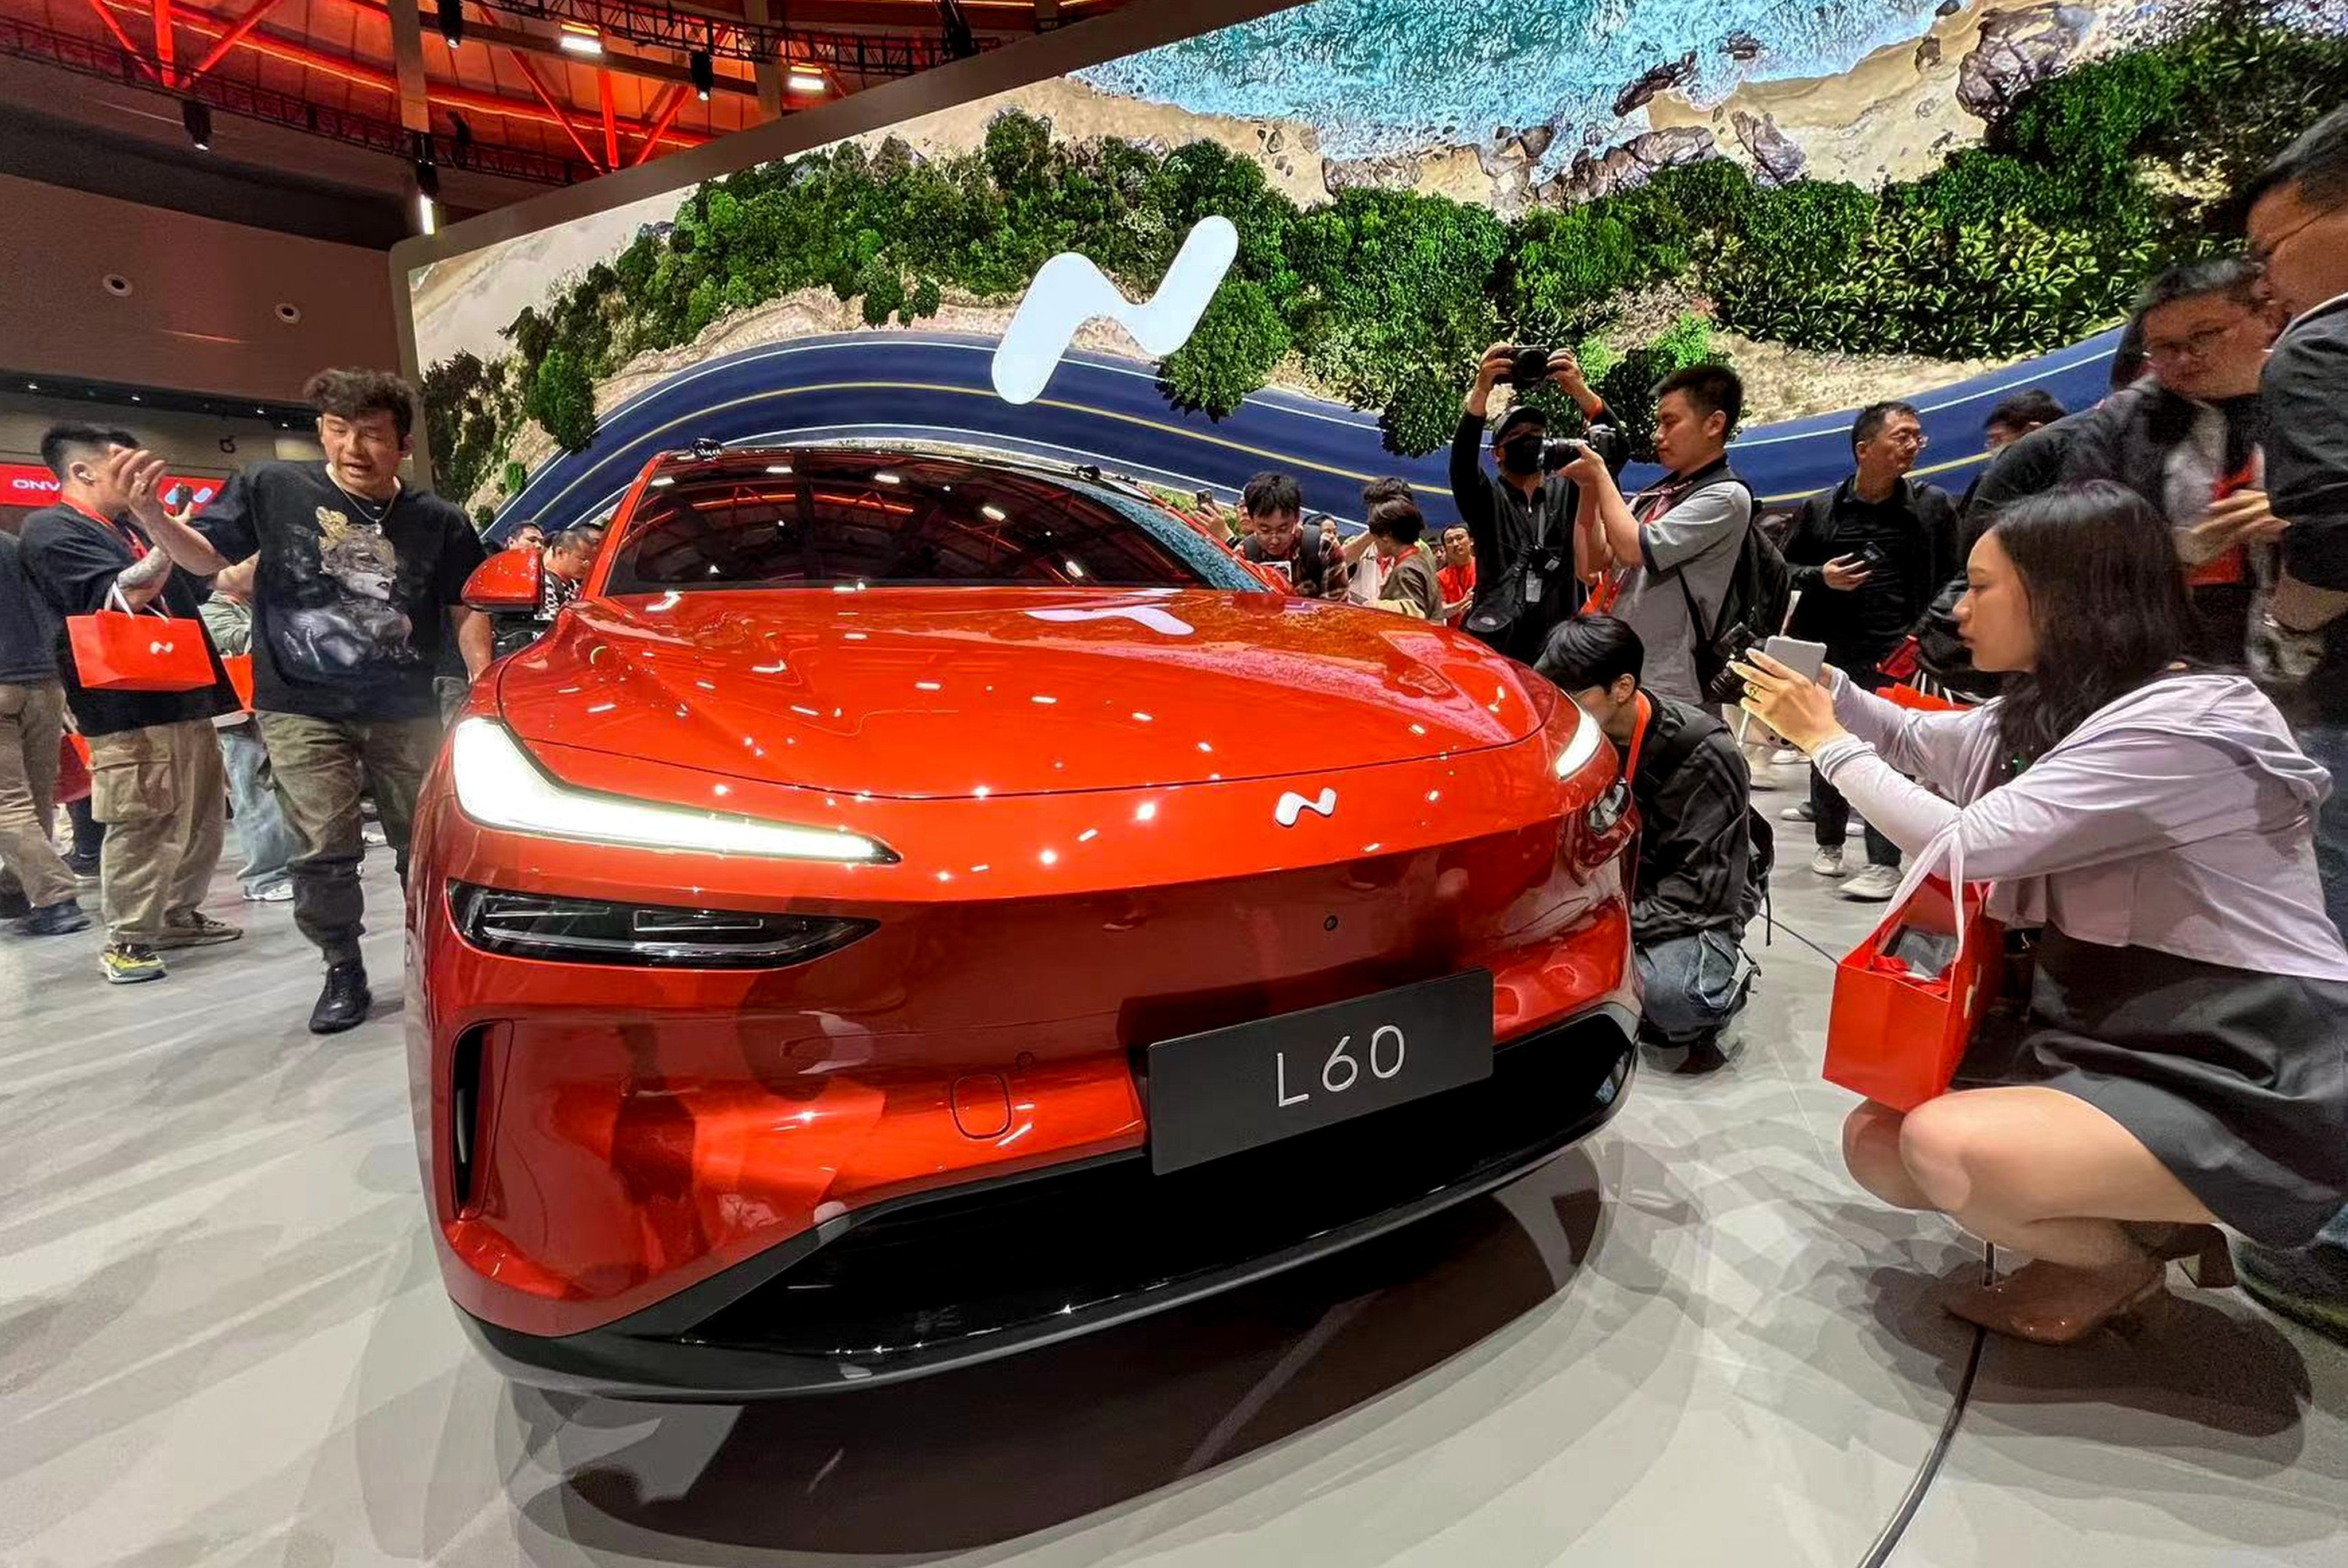 Nio plans to begin mass production and delivery of the L60 (pictured) to mainland customers in September. Photo: Daniel Ren